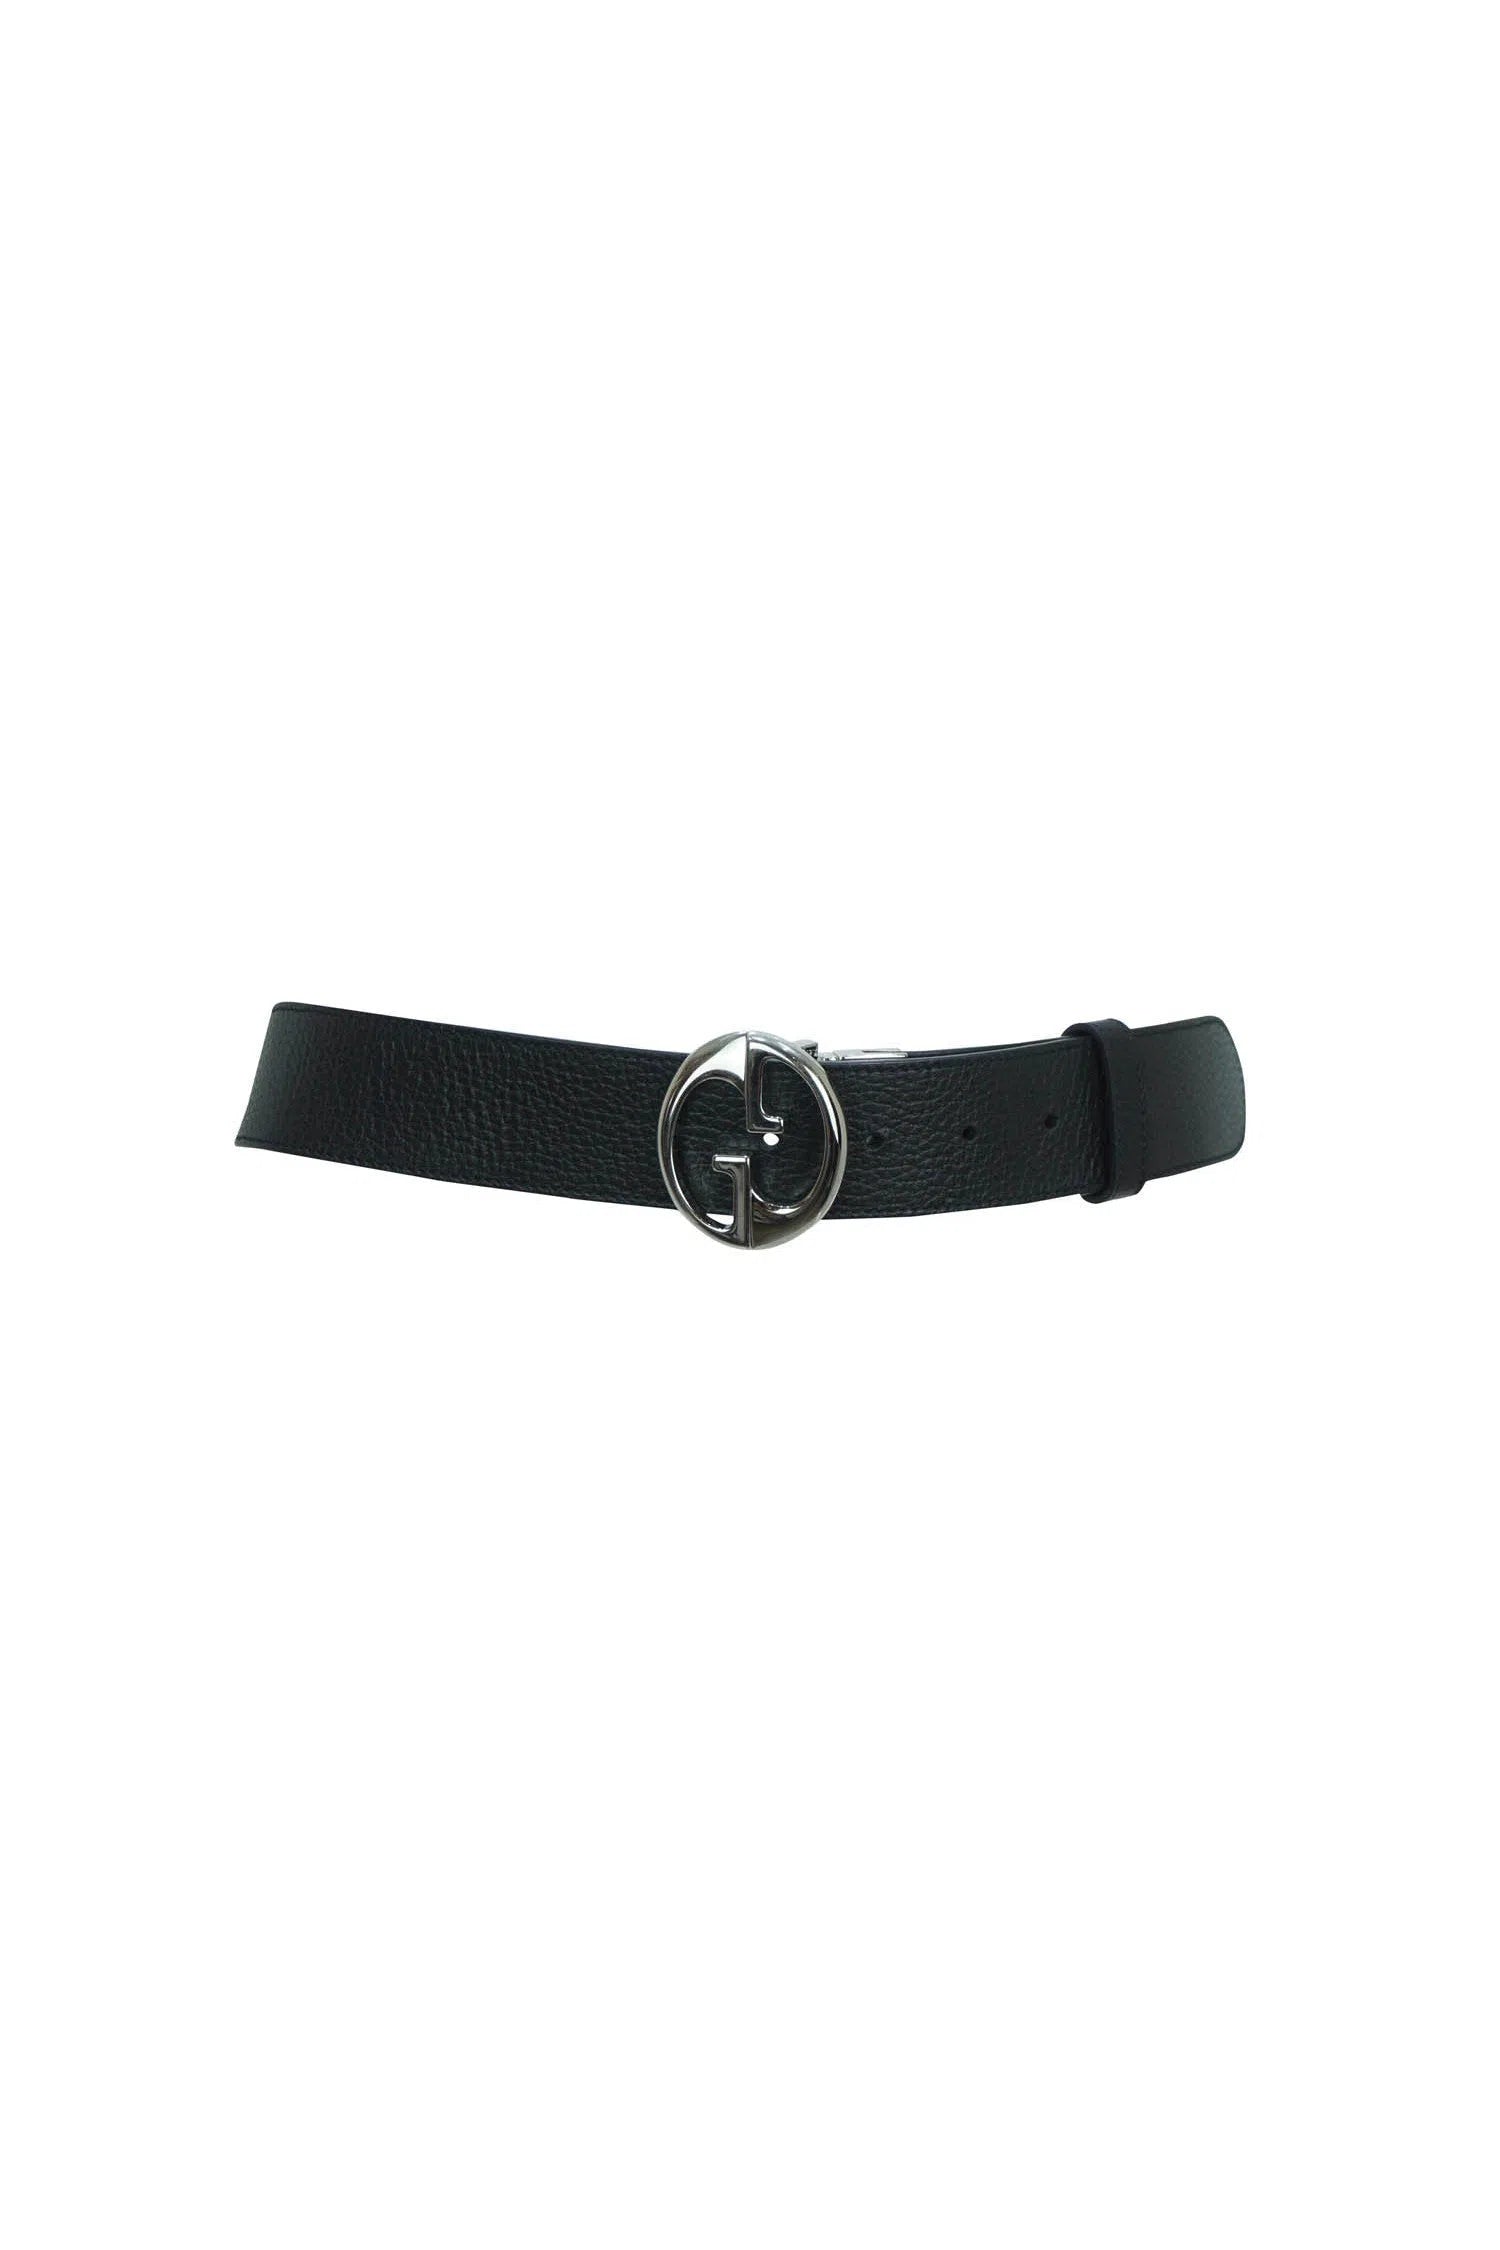 Gucci Black or Blue Reversible GG Belt Size 80/32 - Foxy Couture Carmel